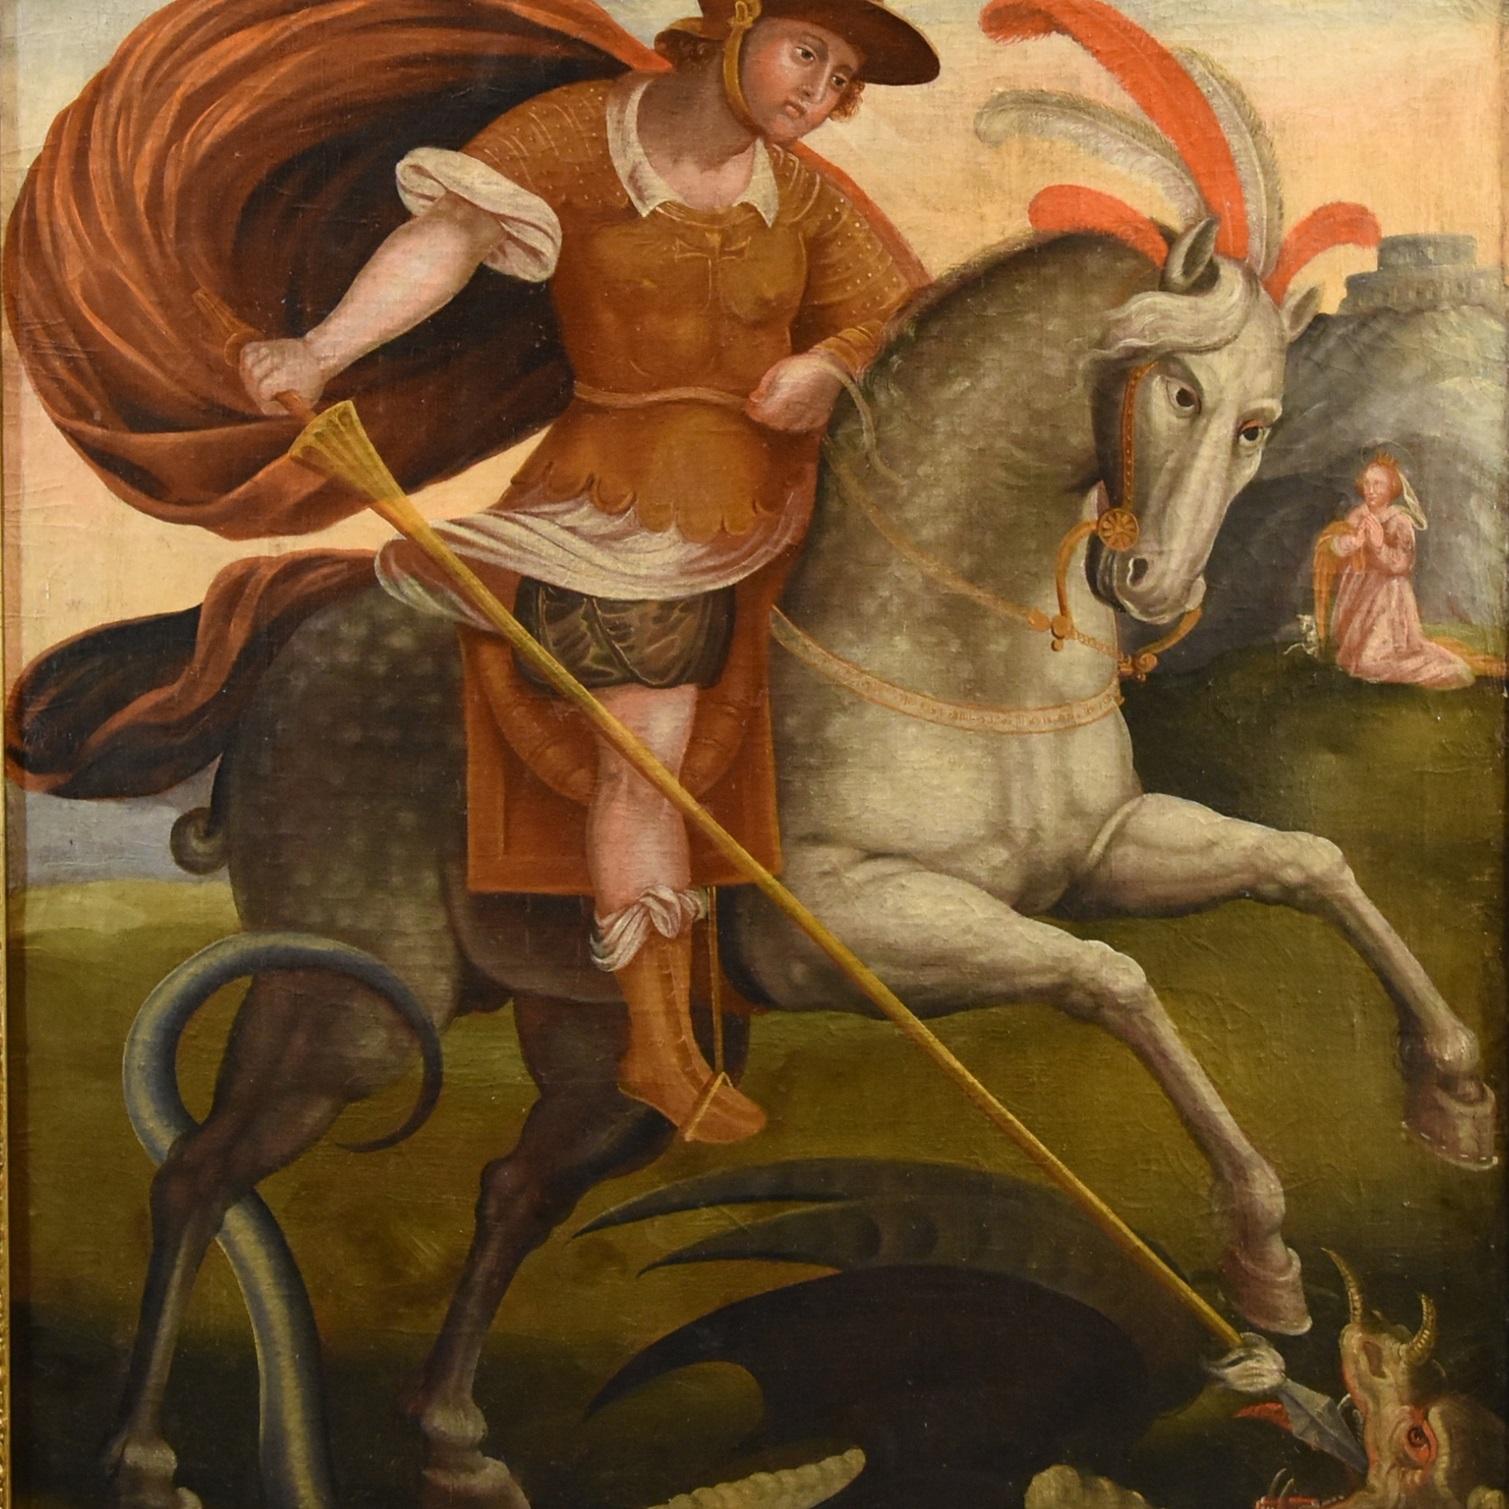 Saint George and the Dragon
Alpine painter, 17th century

Oil on canvas
142 x 96 cm. - framed 158 x 111 cm.

The large painting evocatively illustrates the triumph against the dragon of St. George, a noble knight of the Christian faith, whose